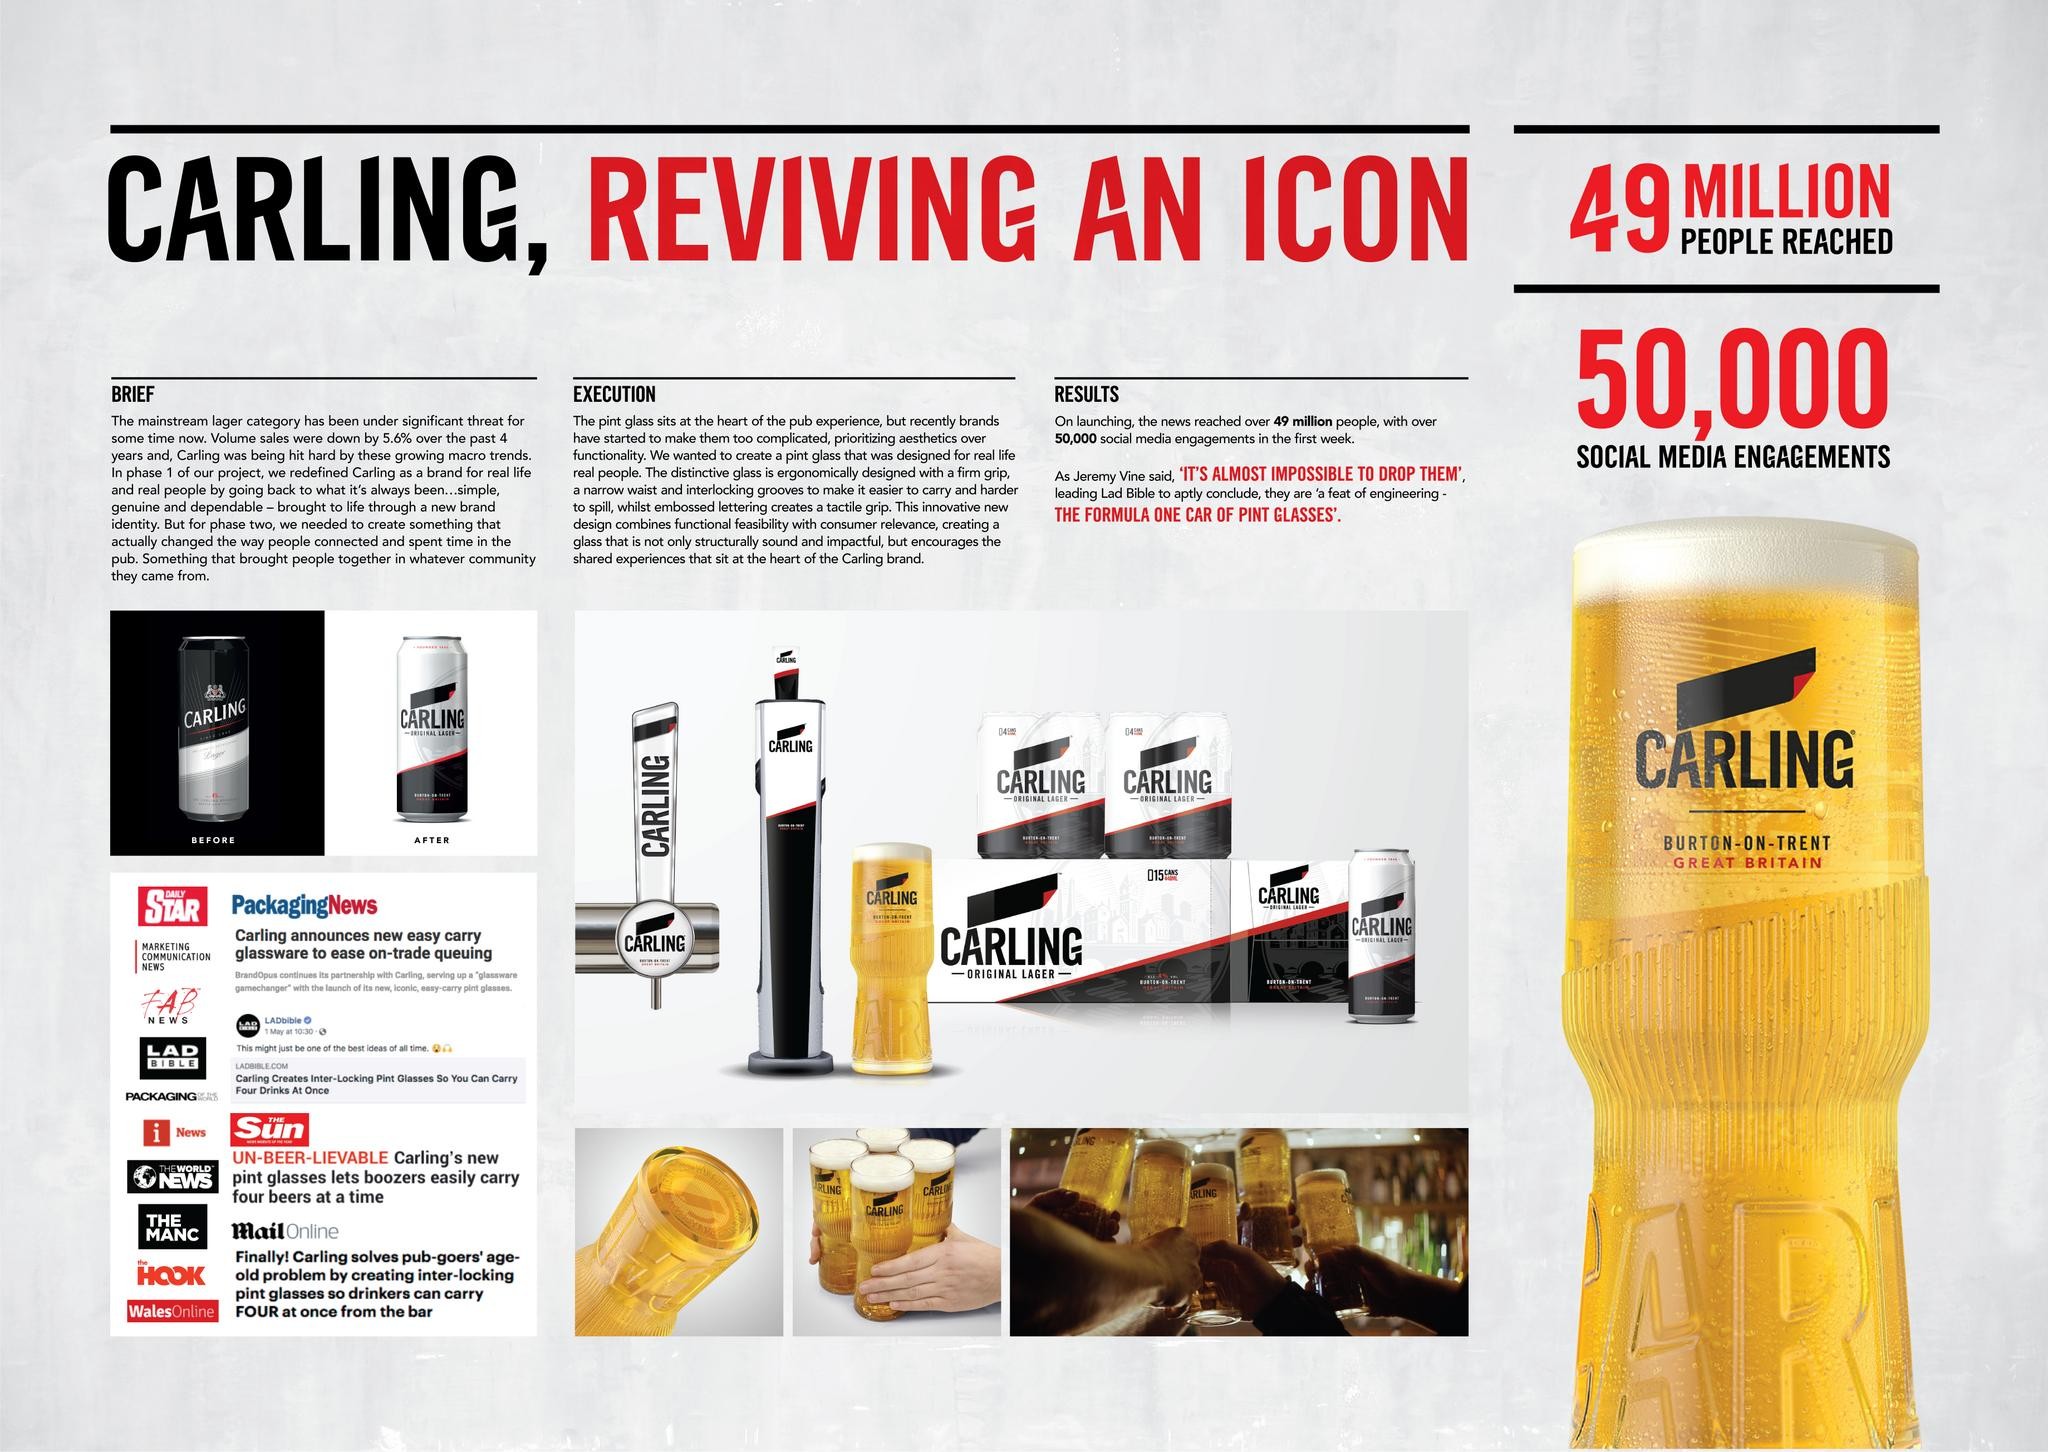 Carling, reviving an icon